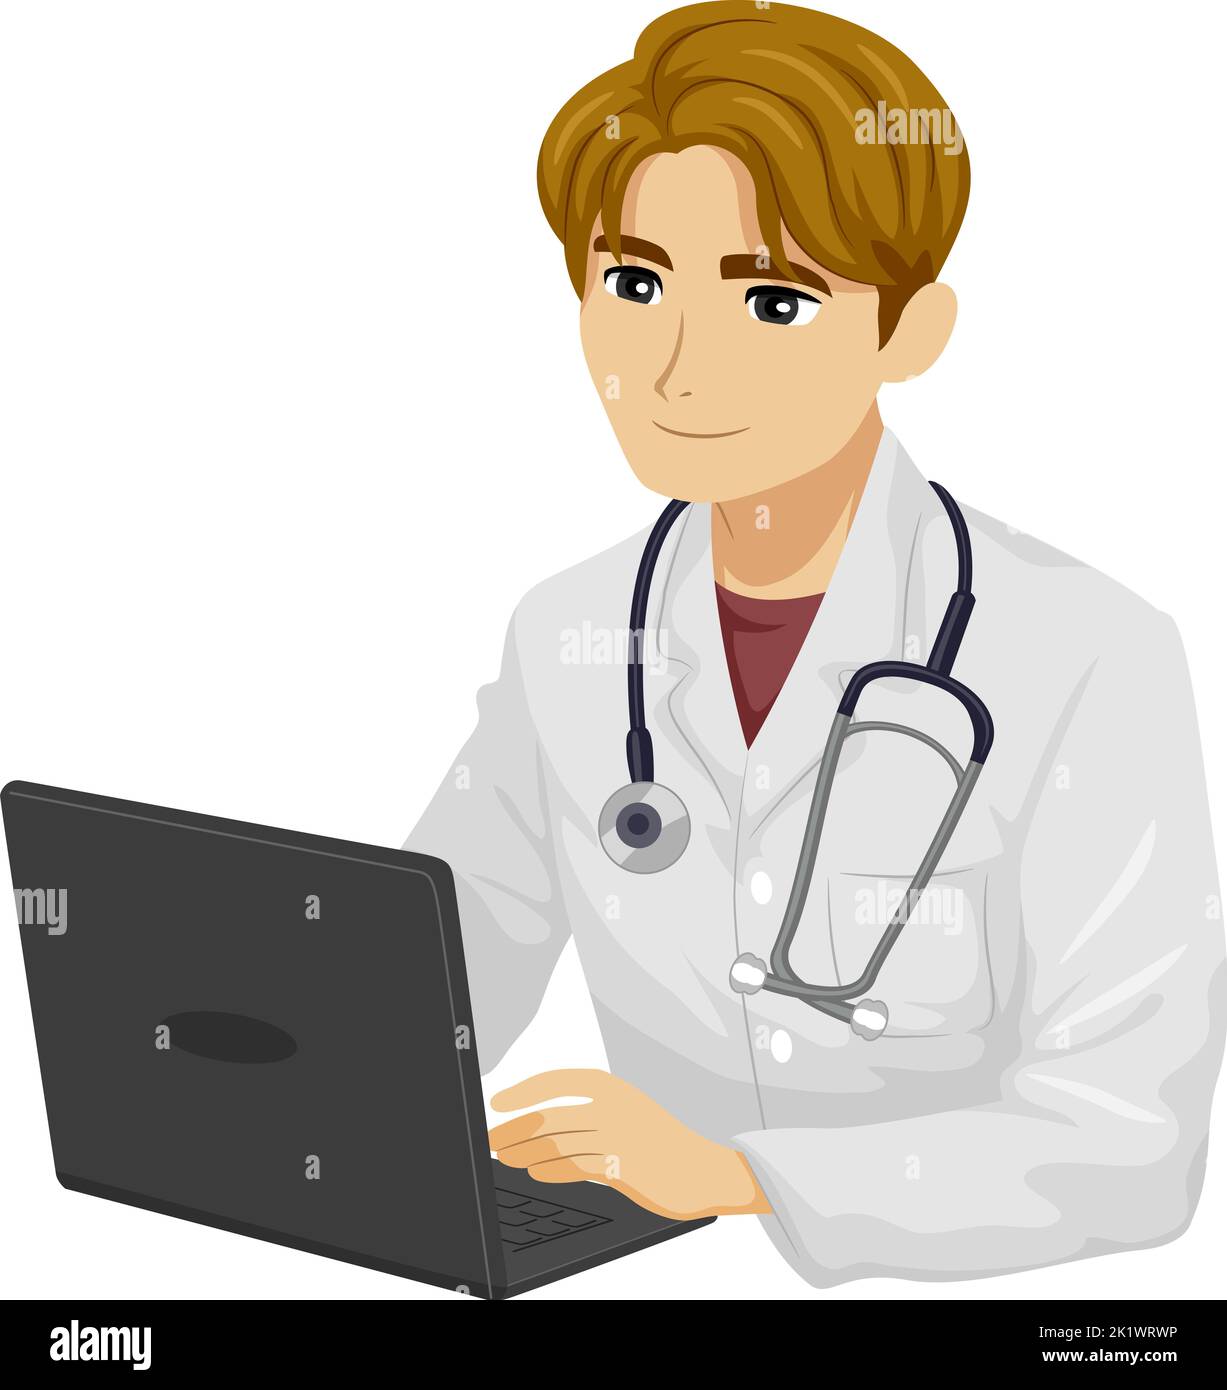 Illustration of Young Guy Doctor Wearing White Gown with Stethoscope Hanging on His Neck and Using Laptop Stock Photo